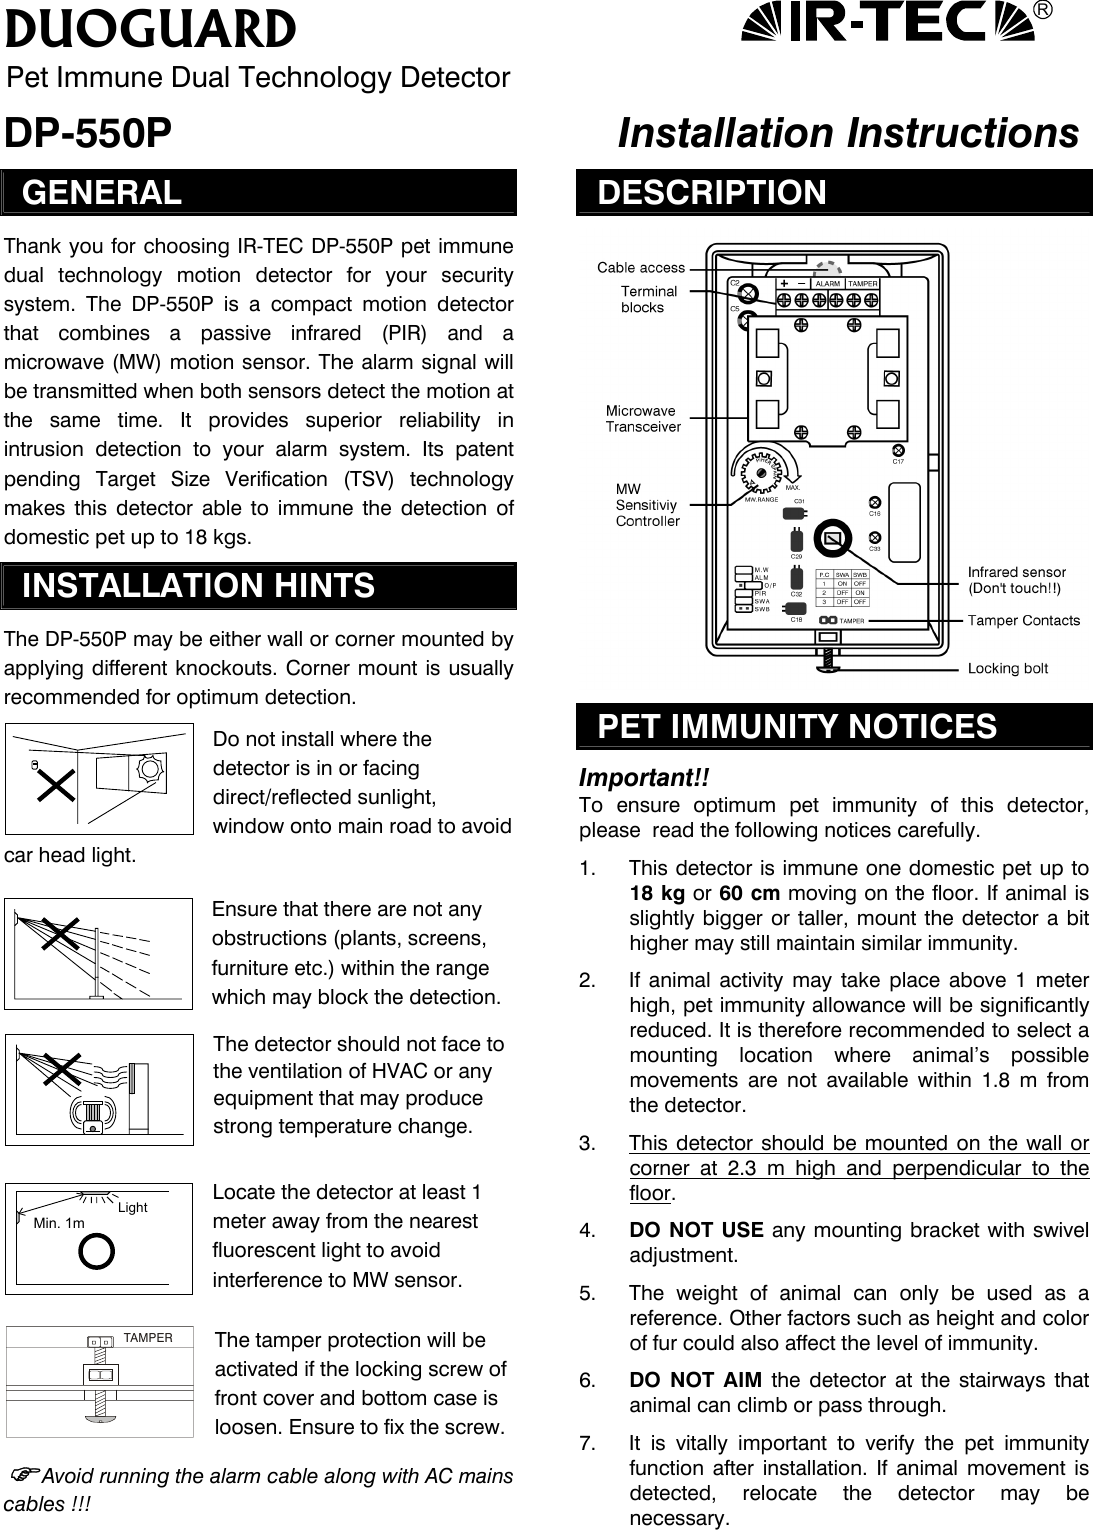 R DUOGUARD Pet Immune Dual Technology Detector DP-550P   Installation Instructions GENERAL Thank you for choosing IR-TEC DP-550P pet immune dual technology motion detector for your security system. The DP-550P is a compact motion detector that combines a passive infrared (PIR) and a microwave (MW) motion sensor. The alarm signal will be transmitted when both sensors detect the motion at the same time. It provides superior reliability in intrusion detection to your alarm system. Its patent pending Target Size Verification (TSV) technology makes this detector able to immune the detection of domestic pet up to 18 kgs. INSTALLATION HINTS The DP-550P may be either wall or corner mounted by applying different knockouts. Corner mount is usually  recommended for optimum detection. Do not install where the detector is in or facing direct/reflected sunlight, window onto main road to avoid car head light.   Ensure that there are not any obstructions (plants, screens, furniture etc.) within the range which may block the detection. The detector should not face to the ventilation of HVAC or any equipment that may produce strong temperature change.   Locate the detector at least 1 meter away from the nearest fluorescent light to avoid interference to MW sensor.  The tamper protection will be activated if the locking screw of front cover and bottom case is loosen. Ensure to fix the screw. Avoid running the alarm cable along with AC mains cables !!!  DESCRIPTION  PET IMMUNITY NOTICES  Important!! To ensure optimum pet immunity of this detector, please  read the following notices carefully.  1.  This detector is immune one domestic pet up to 18 kg or 60 cm moving on the floor. If animal is slightly bigger or taller, mount the detector a bit higher may still maintain similar immunity.  2.  If animal activity may take place above 1 meter high, pet immunity allowance will be significantly reduced. It is therefore recommended to select a mounting location where animal’s possible movements are not available within 1.8 m from the detector.   3.  This detector should be mounted on the wall or corner at 2.3 m high and perpendicular to the floor.  Min. 1mLight 4.  DO NOT USE any mounting bracket with swivel adjustment.    5.  The weight of animal can only be used as a reference. Other factors such as height and color of fur could also affect the level of immunity.  TAMPER6.  DO NOT AIM the detector at the stairways that animal can climb or pass through.  7.  It is vitally important to verify the pet immunity function after installation. If animal movement is detected, relocate the detector may be necessary. 